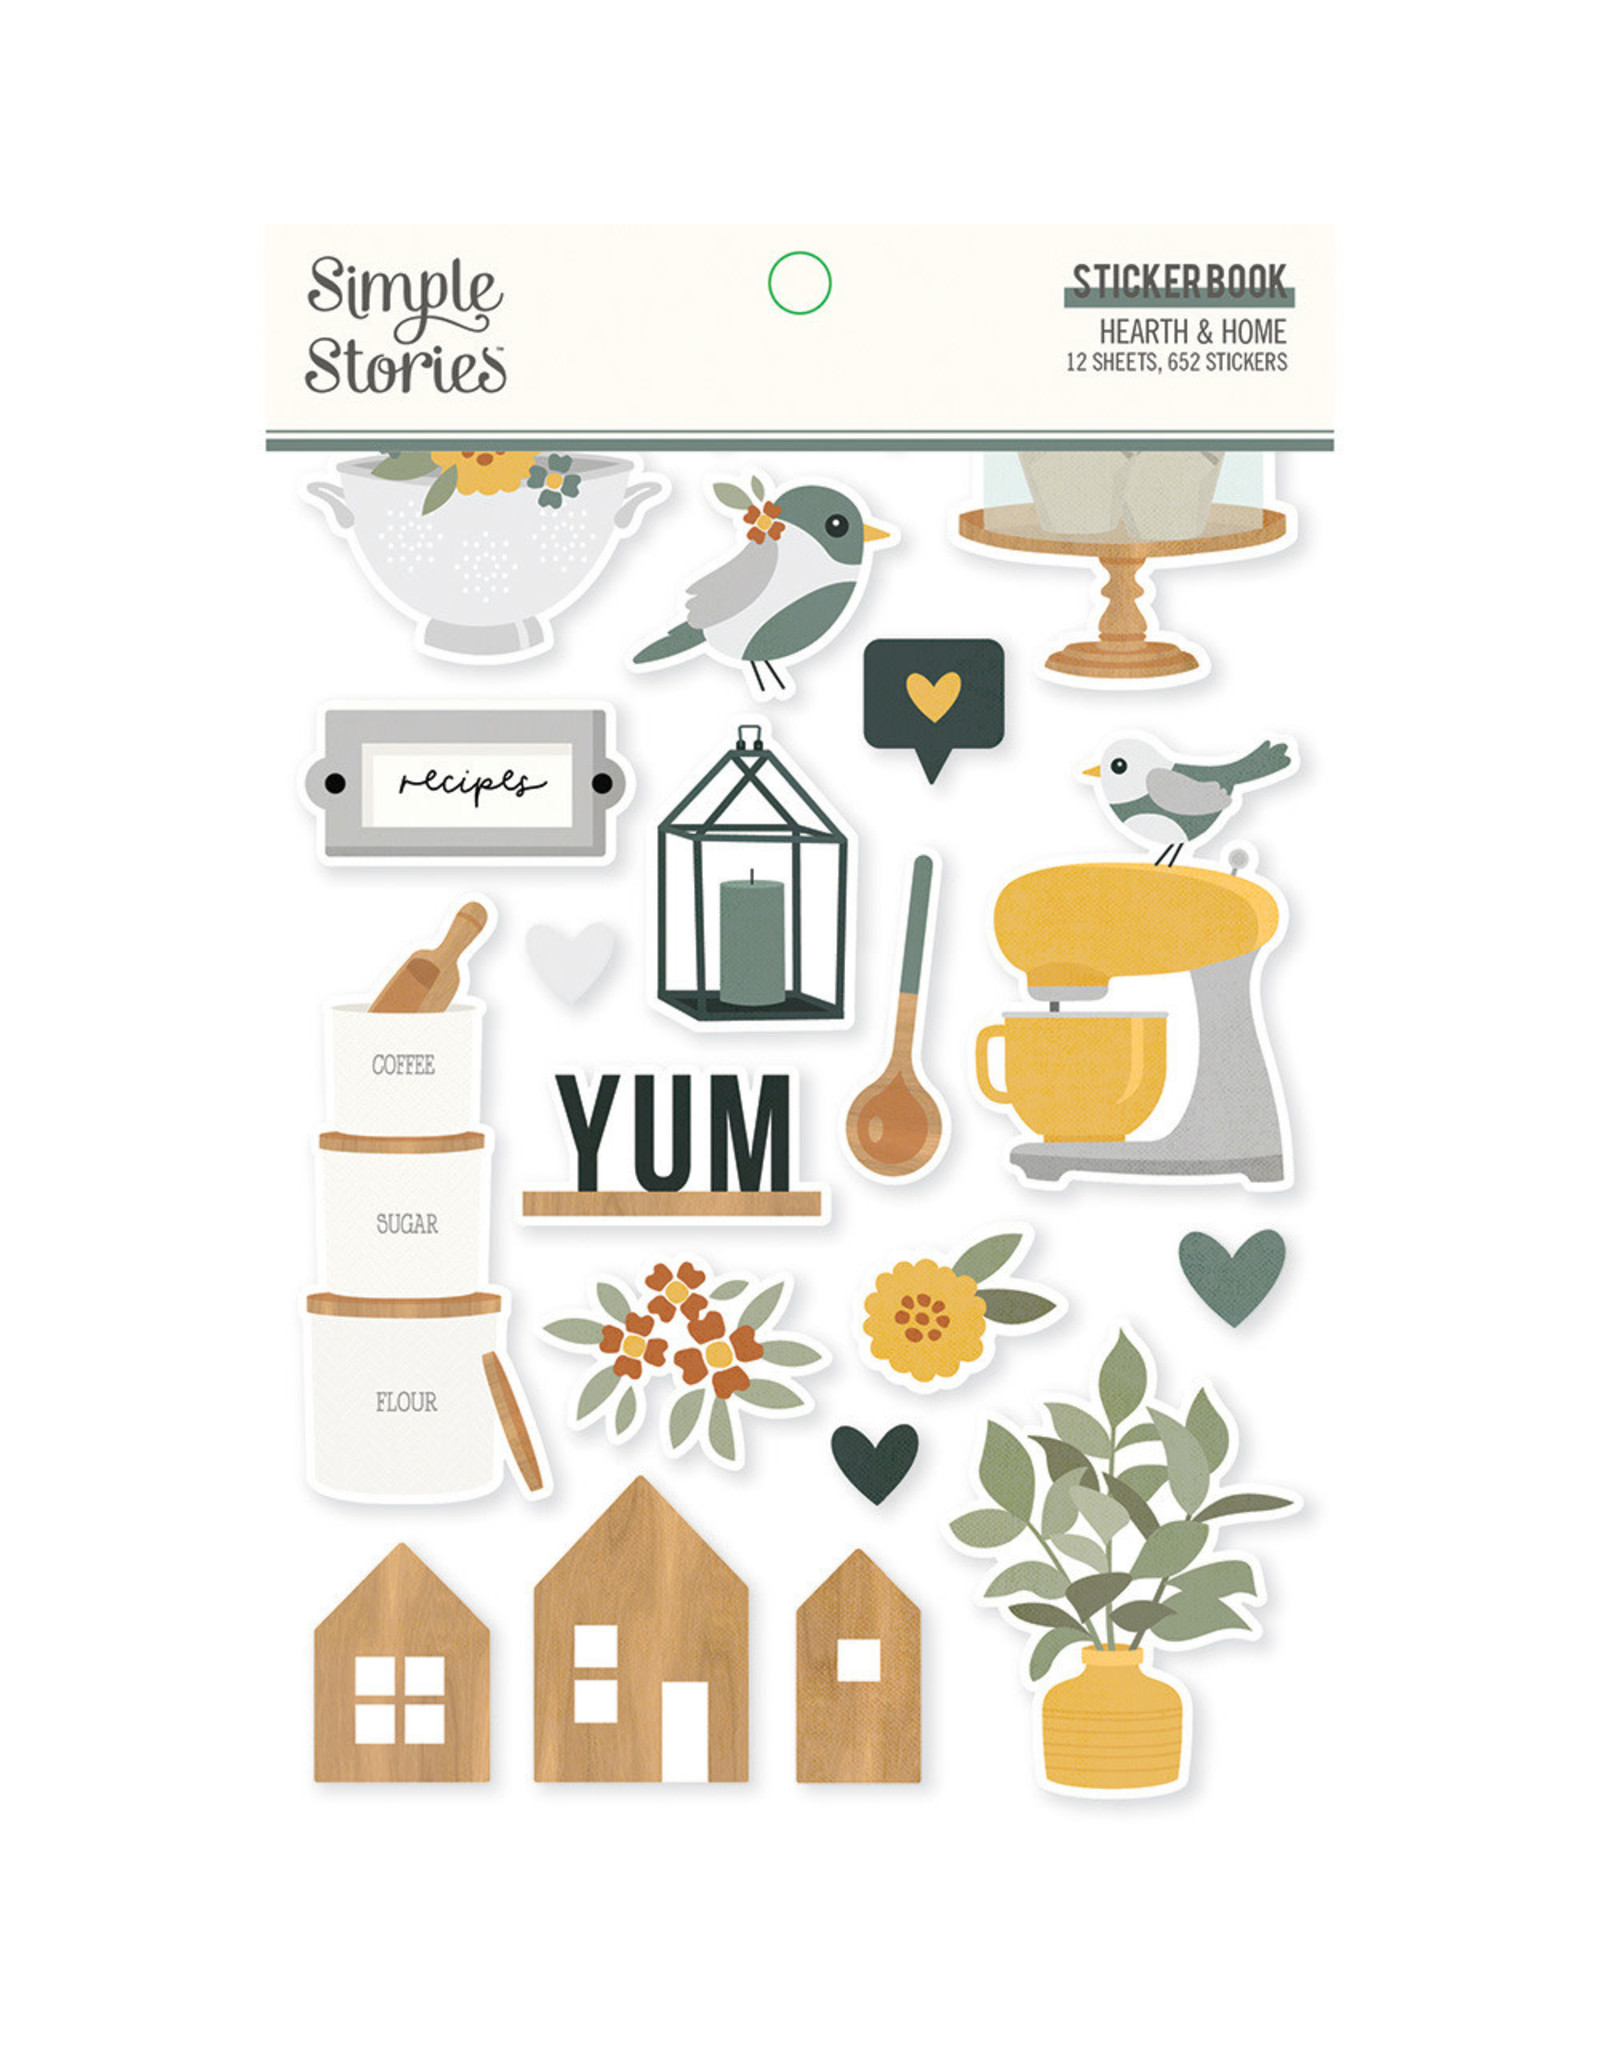 SIMPLE STORIES SIMPLE STORIES HEARTH & HOME STICKER BOOK